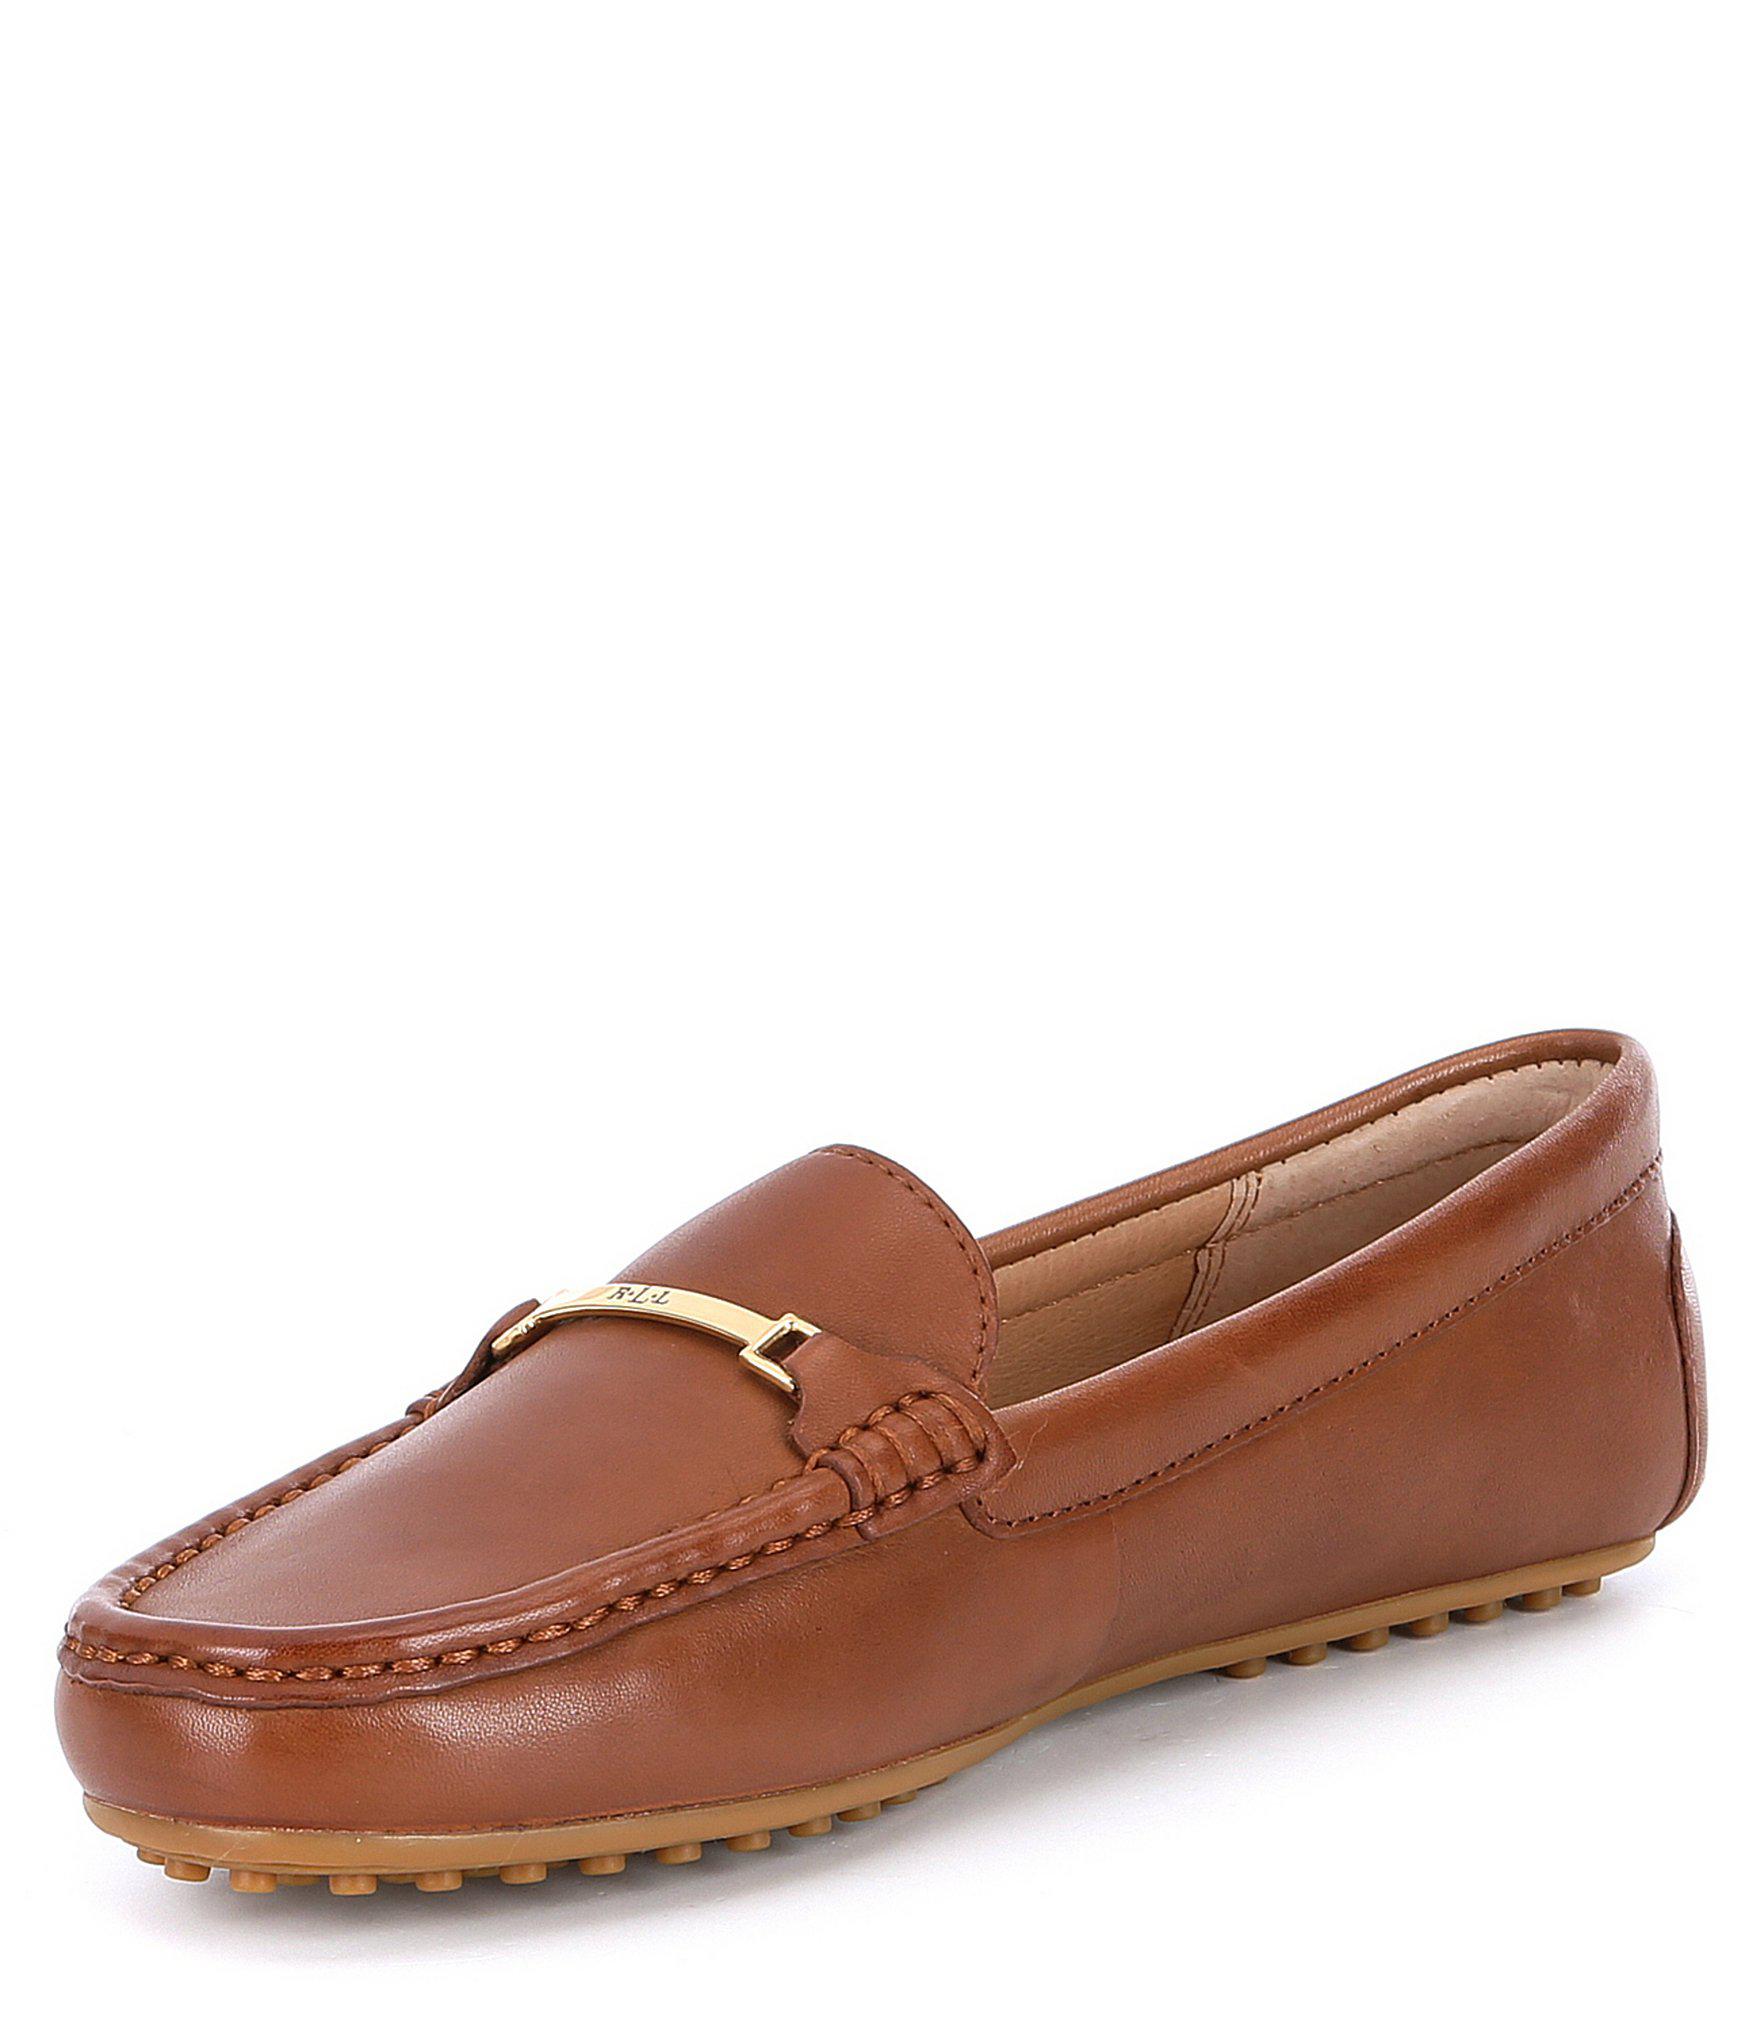 Lauren by Ralph Lauren Briony Leather Driving Loafers in Brown - Lyst